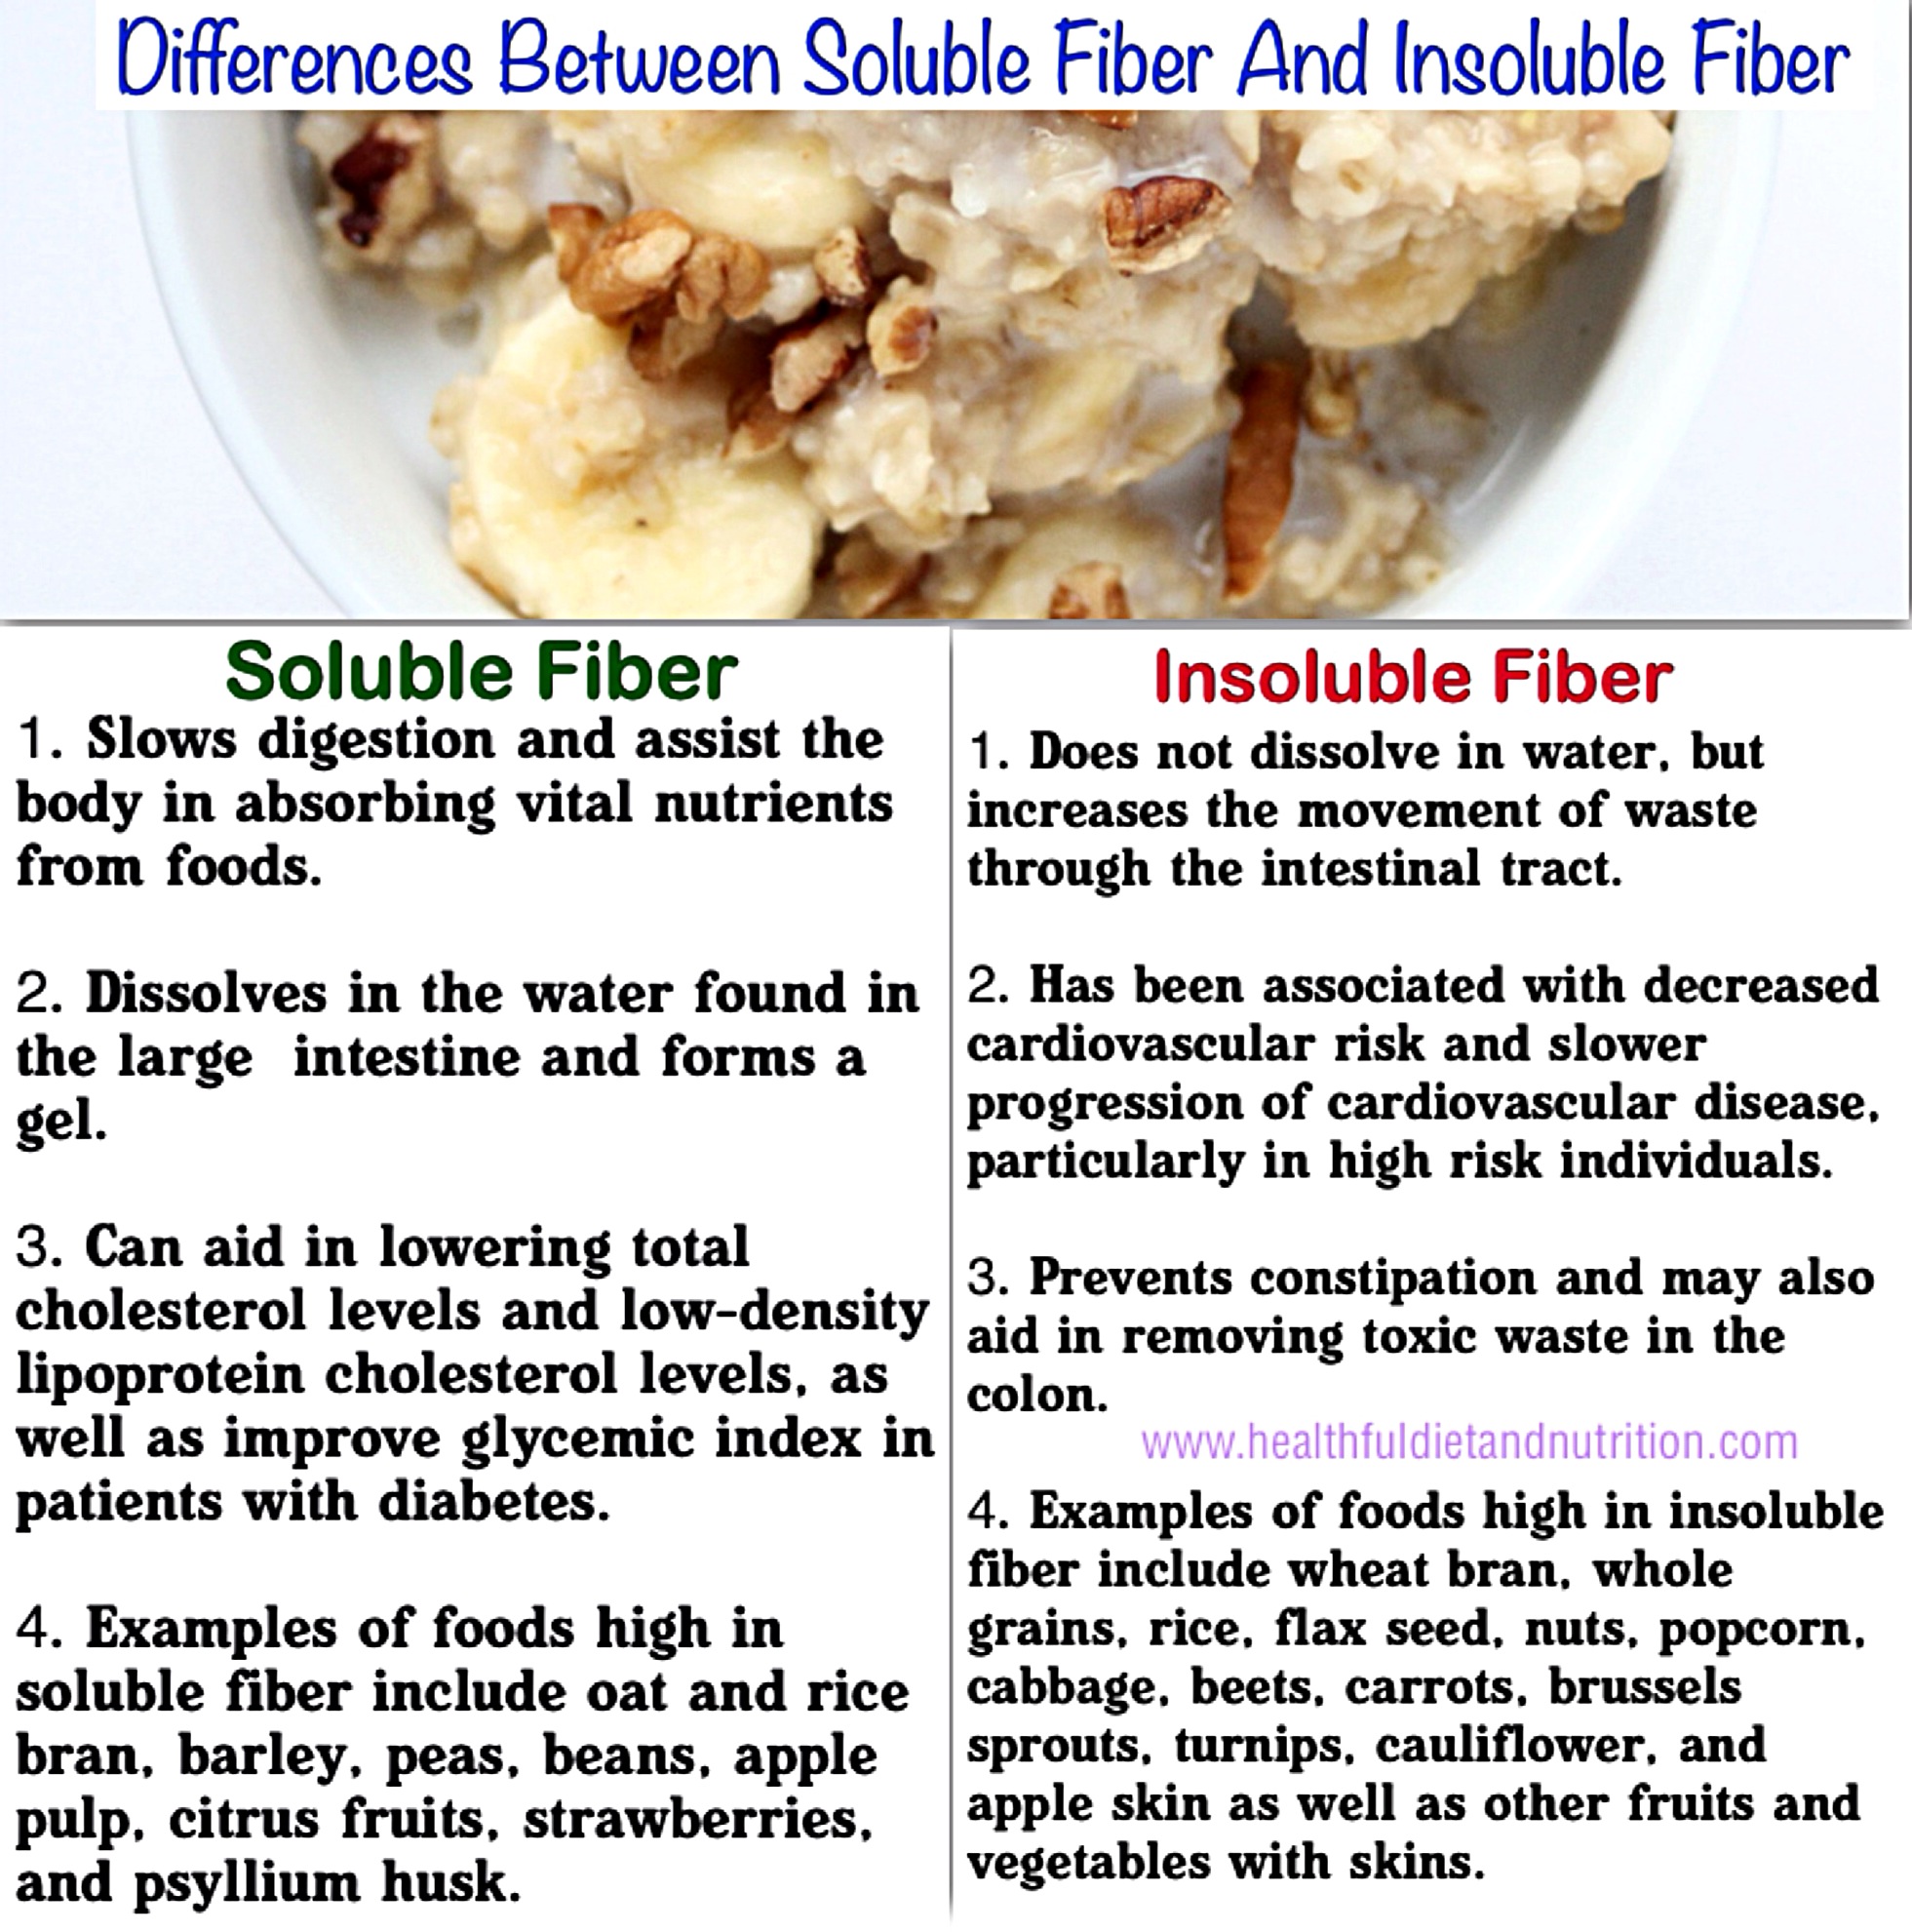 Differences Between Soluble And Insoluble Fiber